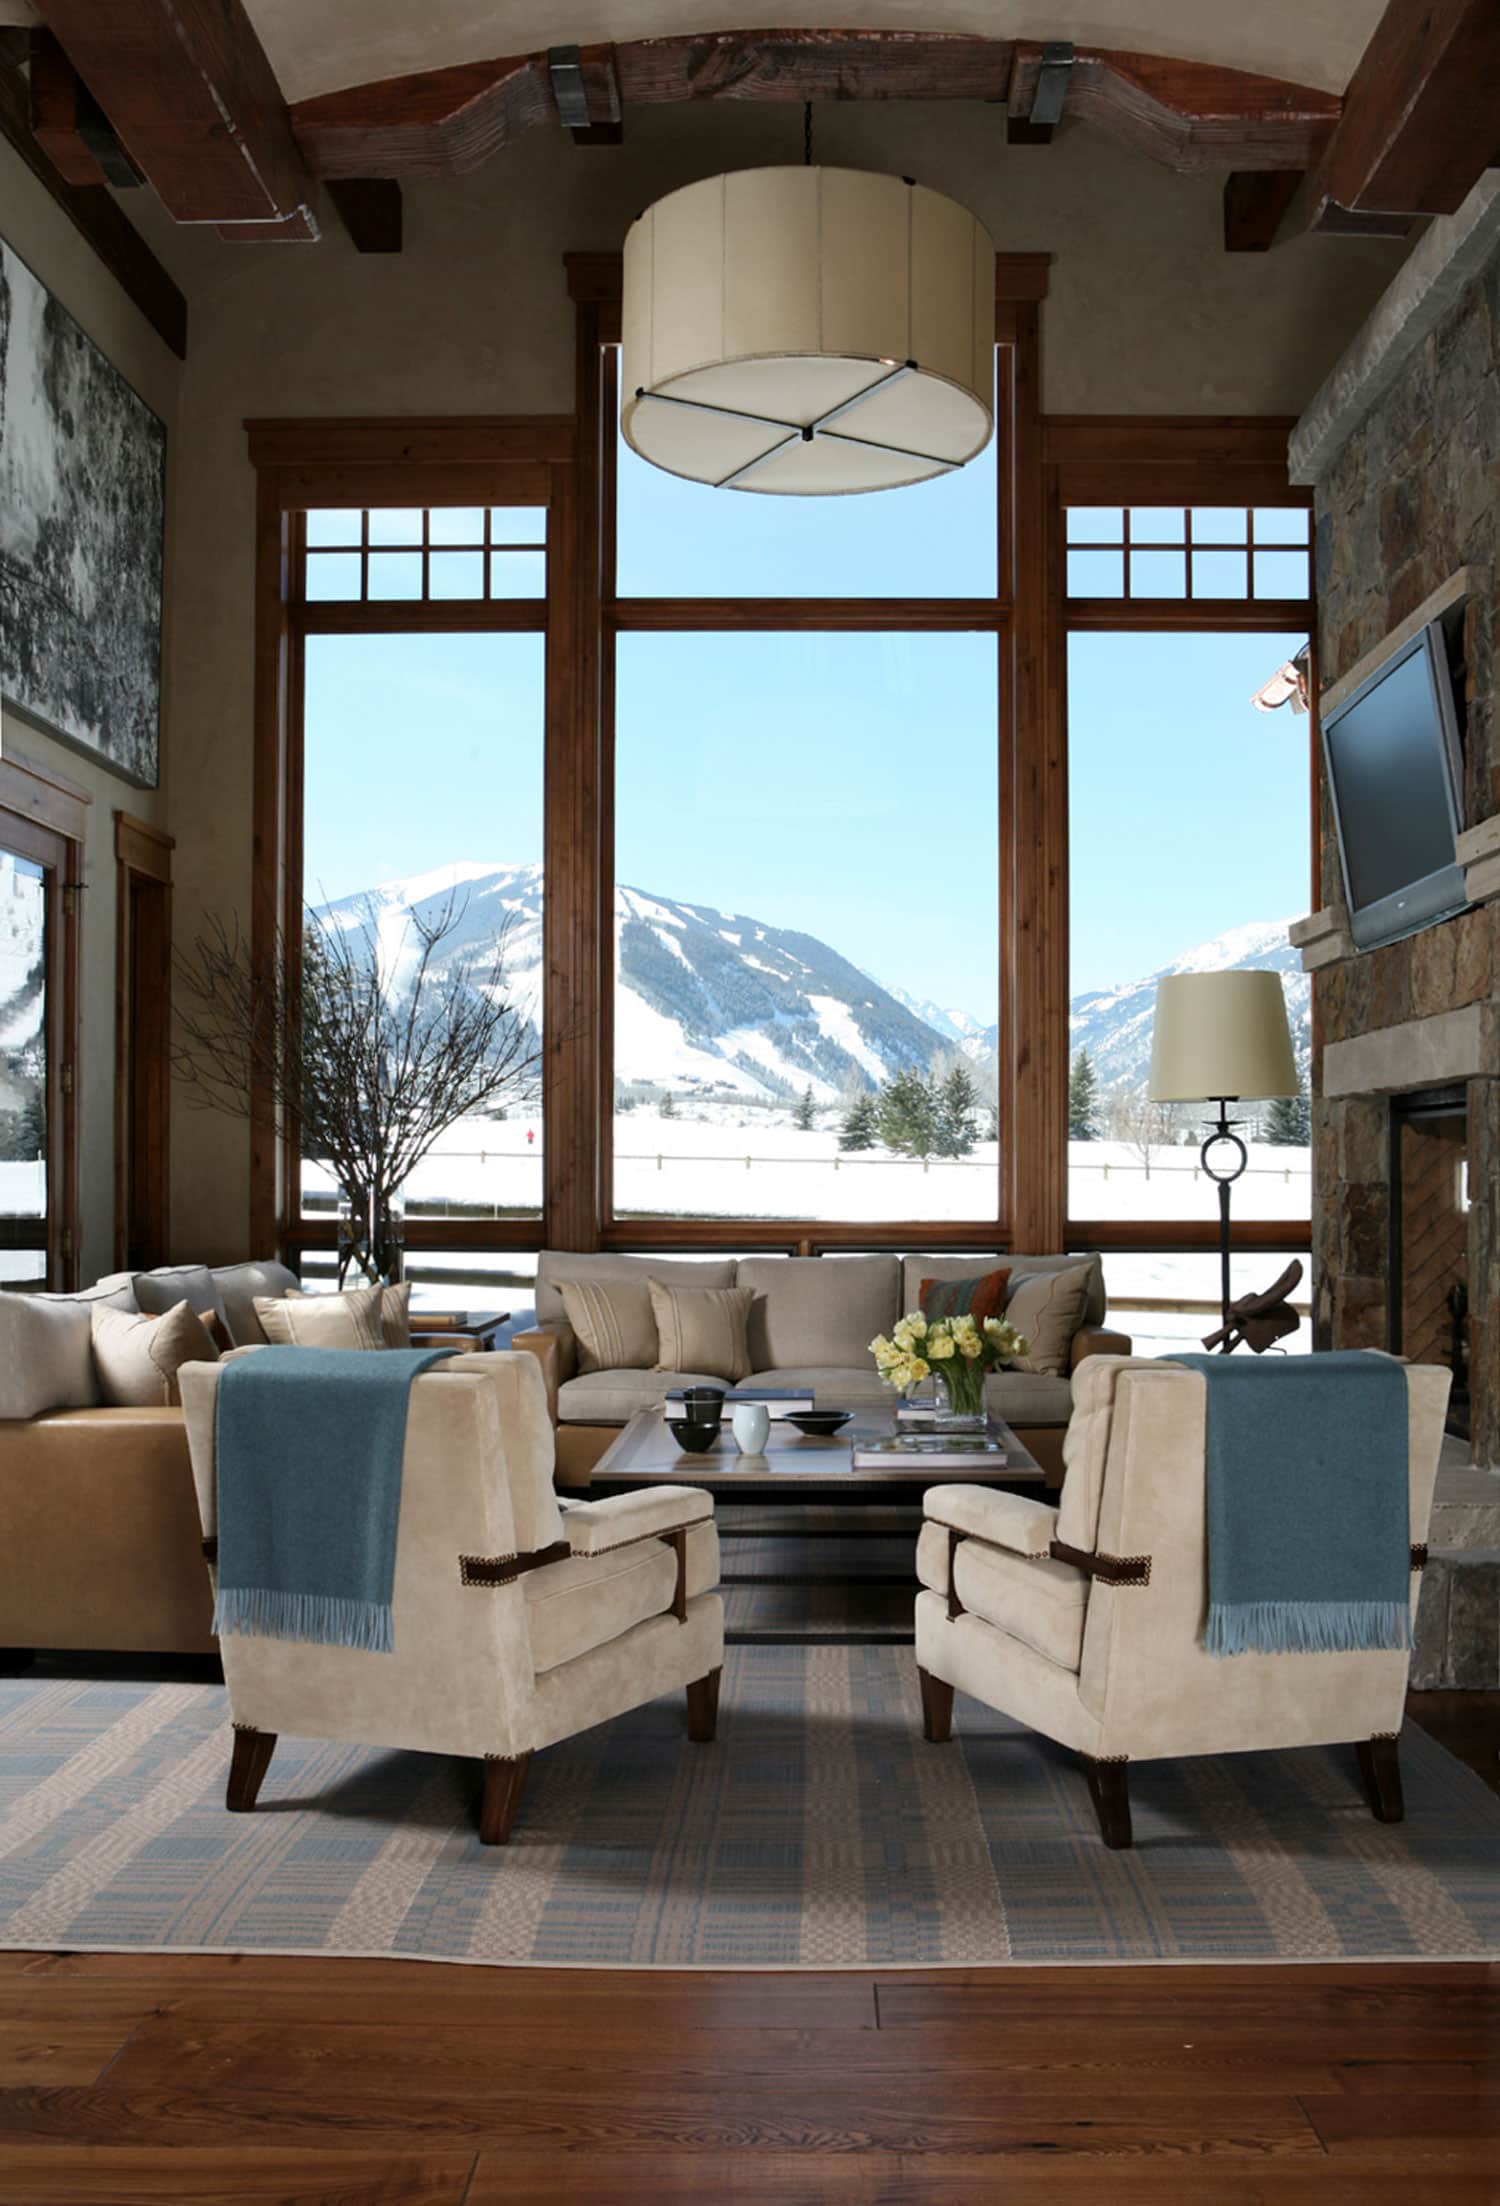 Designed by Carol Egan, this image shows a double height living room in an Aspen residence with large windows overlooking snowcapped mountains.  A large vellum shade Pendant light fixture hangs above the seating area in the living room.  Two Armchairs by Roman Thomas are upholstered in corduroy fabric and sit on a handwoven area rug in linen and pale blue wool.